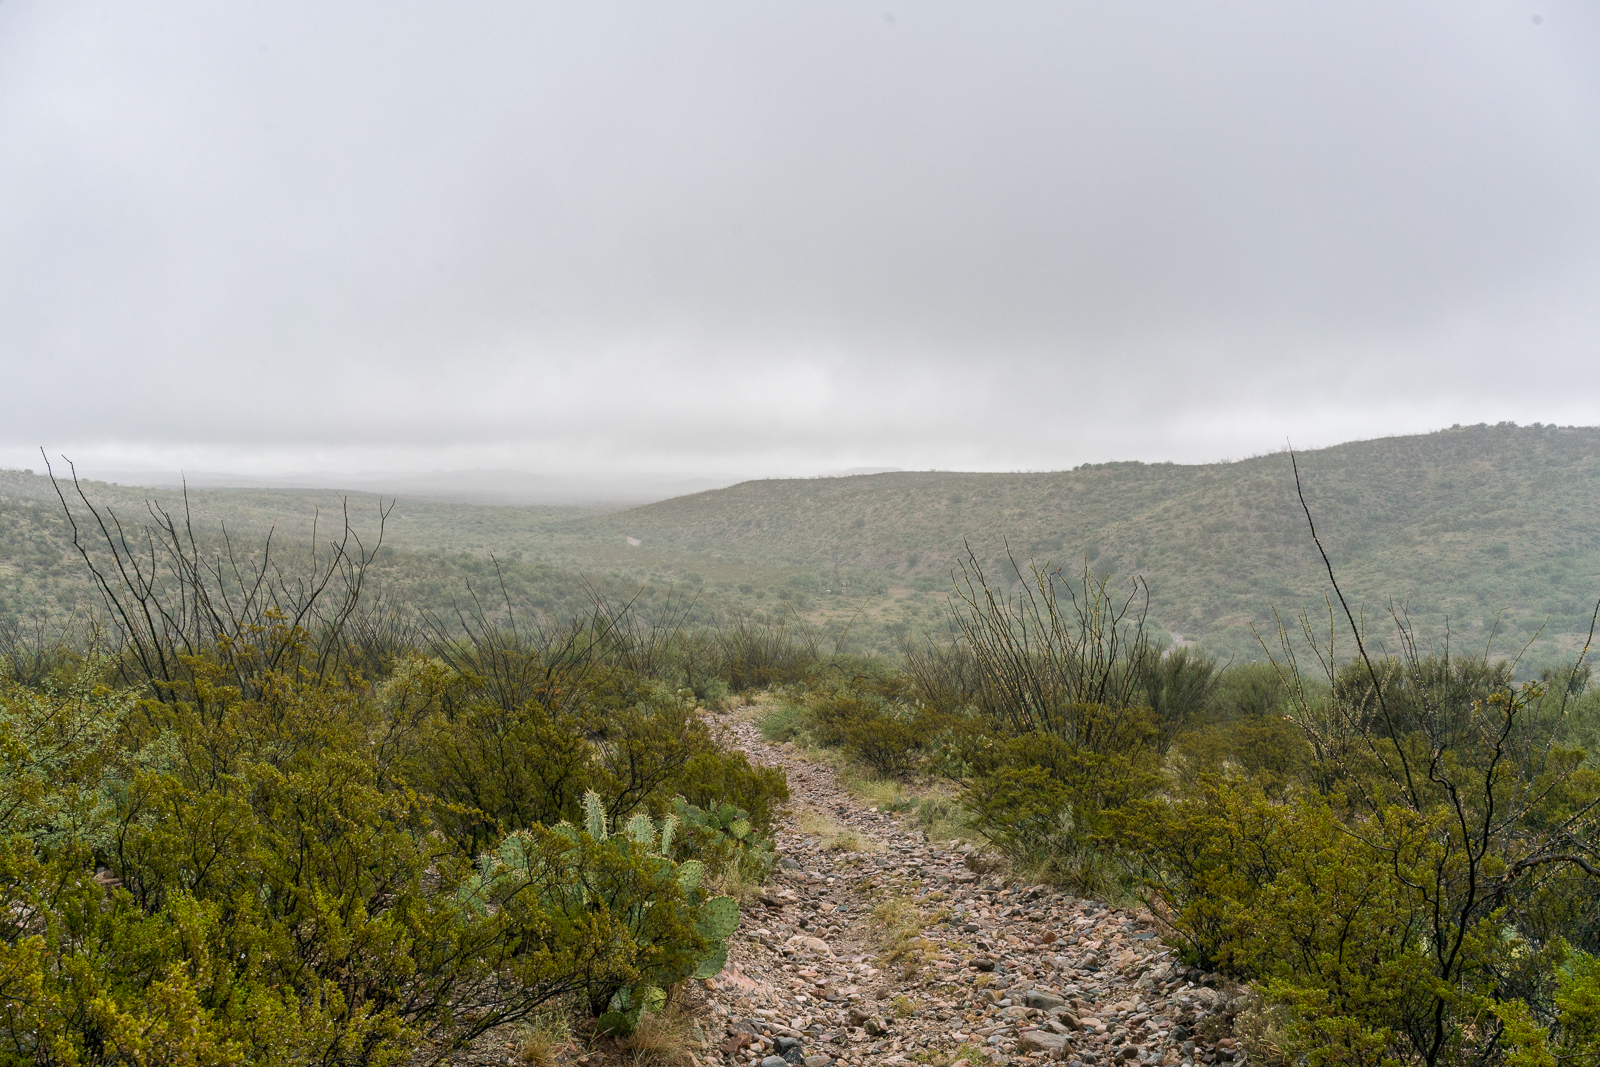 The road across the Mesa descends towards Mesa Well and off into the clouds. September 2016.